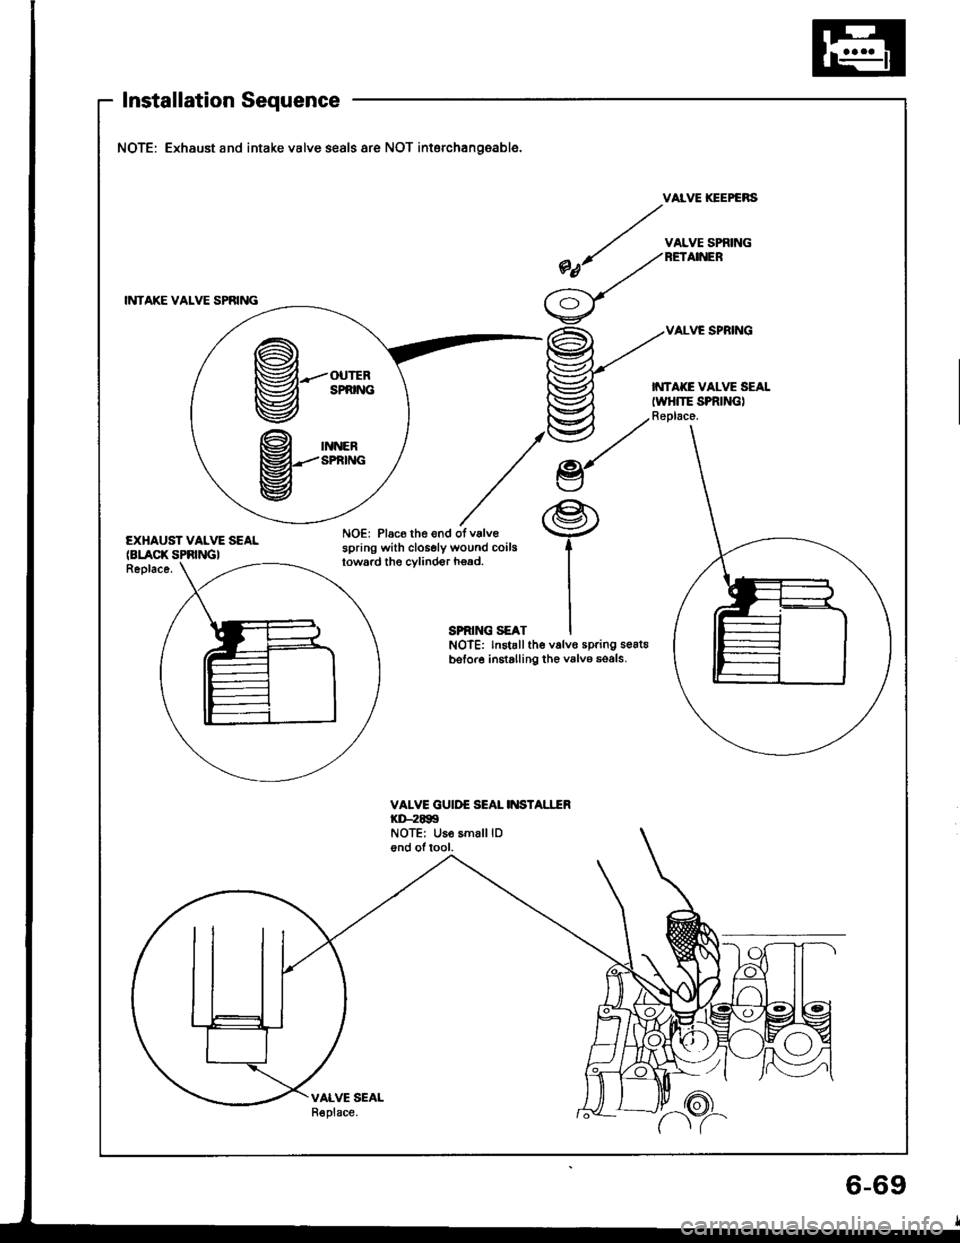 HONDA INTEGRA 1994 4.G Workshop Manual Installation Sequence
NOTE: Exhaust and intake valve seals are NOT interchangeable.
VAIVE IGEPGNS
INTAKE VALVE SPAING
/ v^LvEsPittNG
*nt /^no,n
/=\/\y
VALVE SPRING
EXHAUST VALVE SEALNOE: Place the e